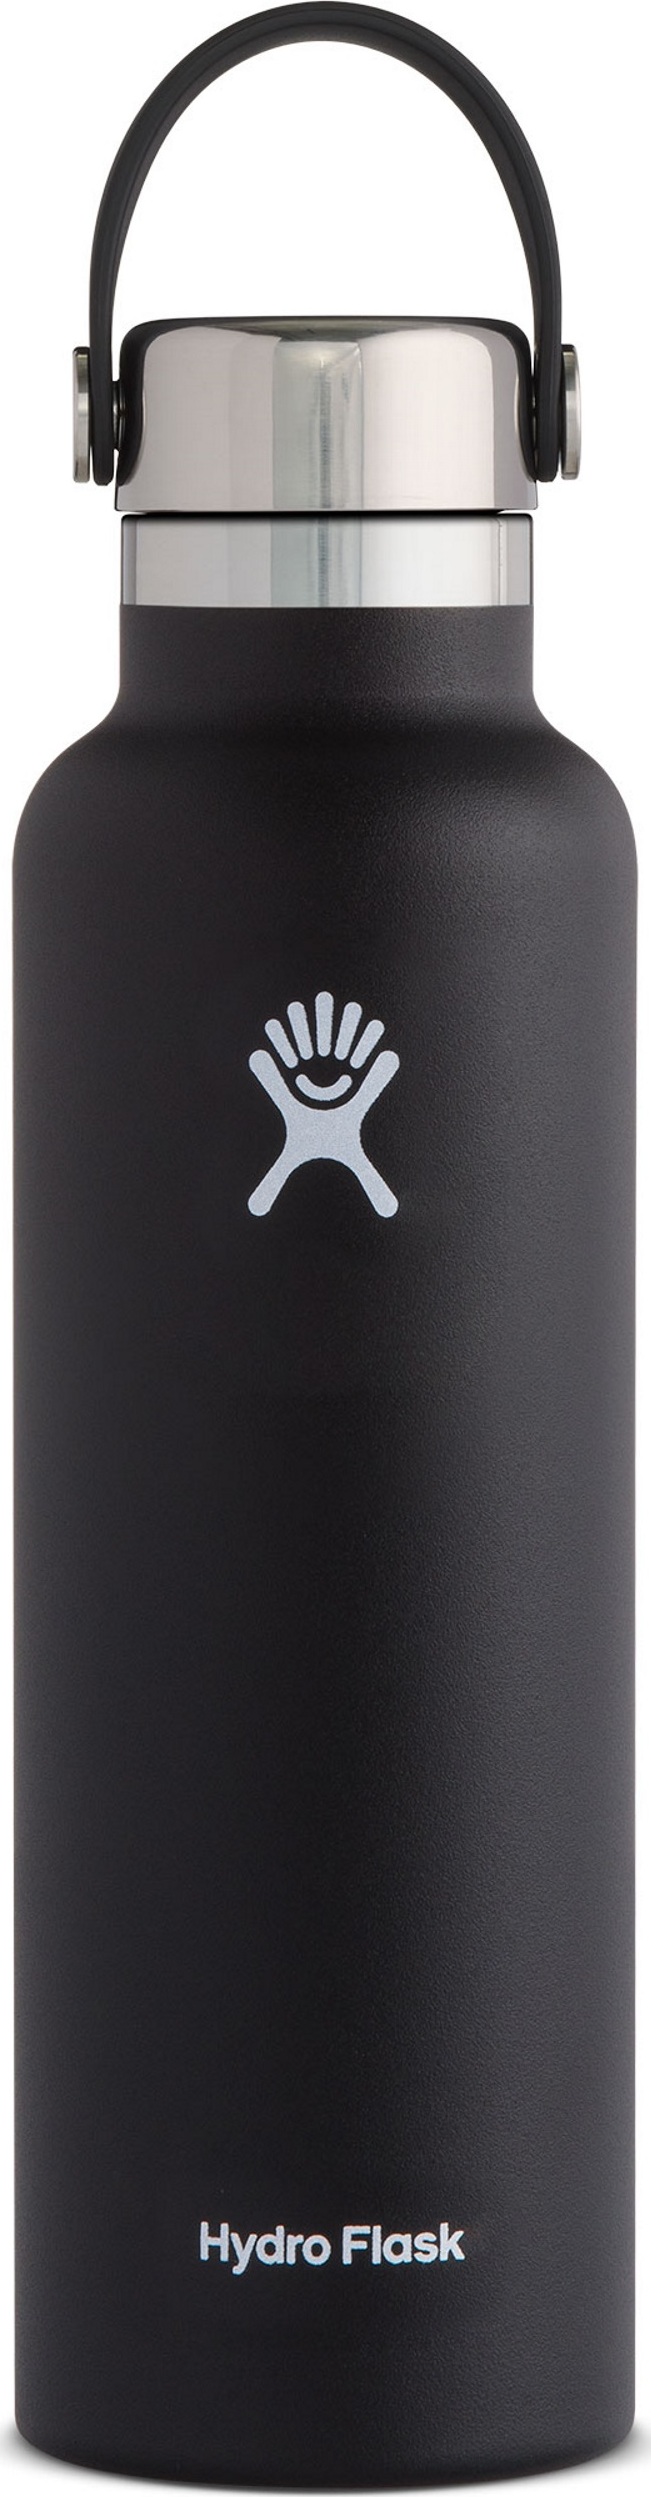 Hydro Flask Standard Mouth Stainless Steel Cap 621 ml Black